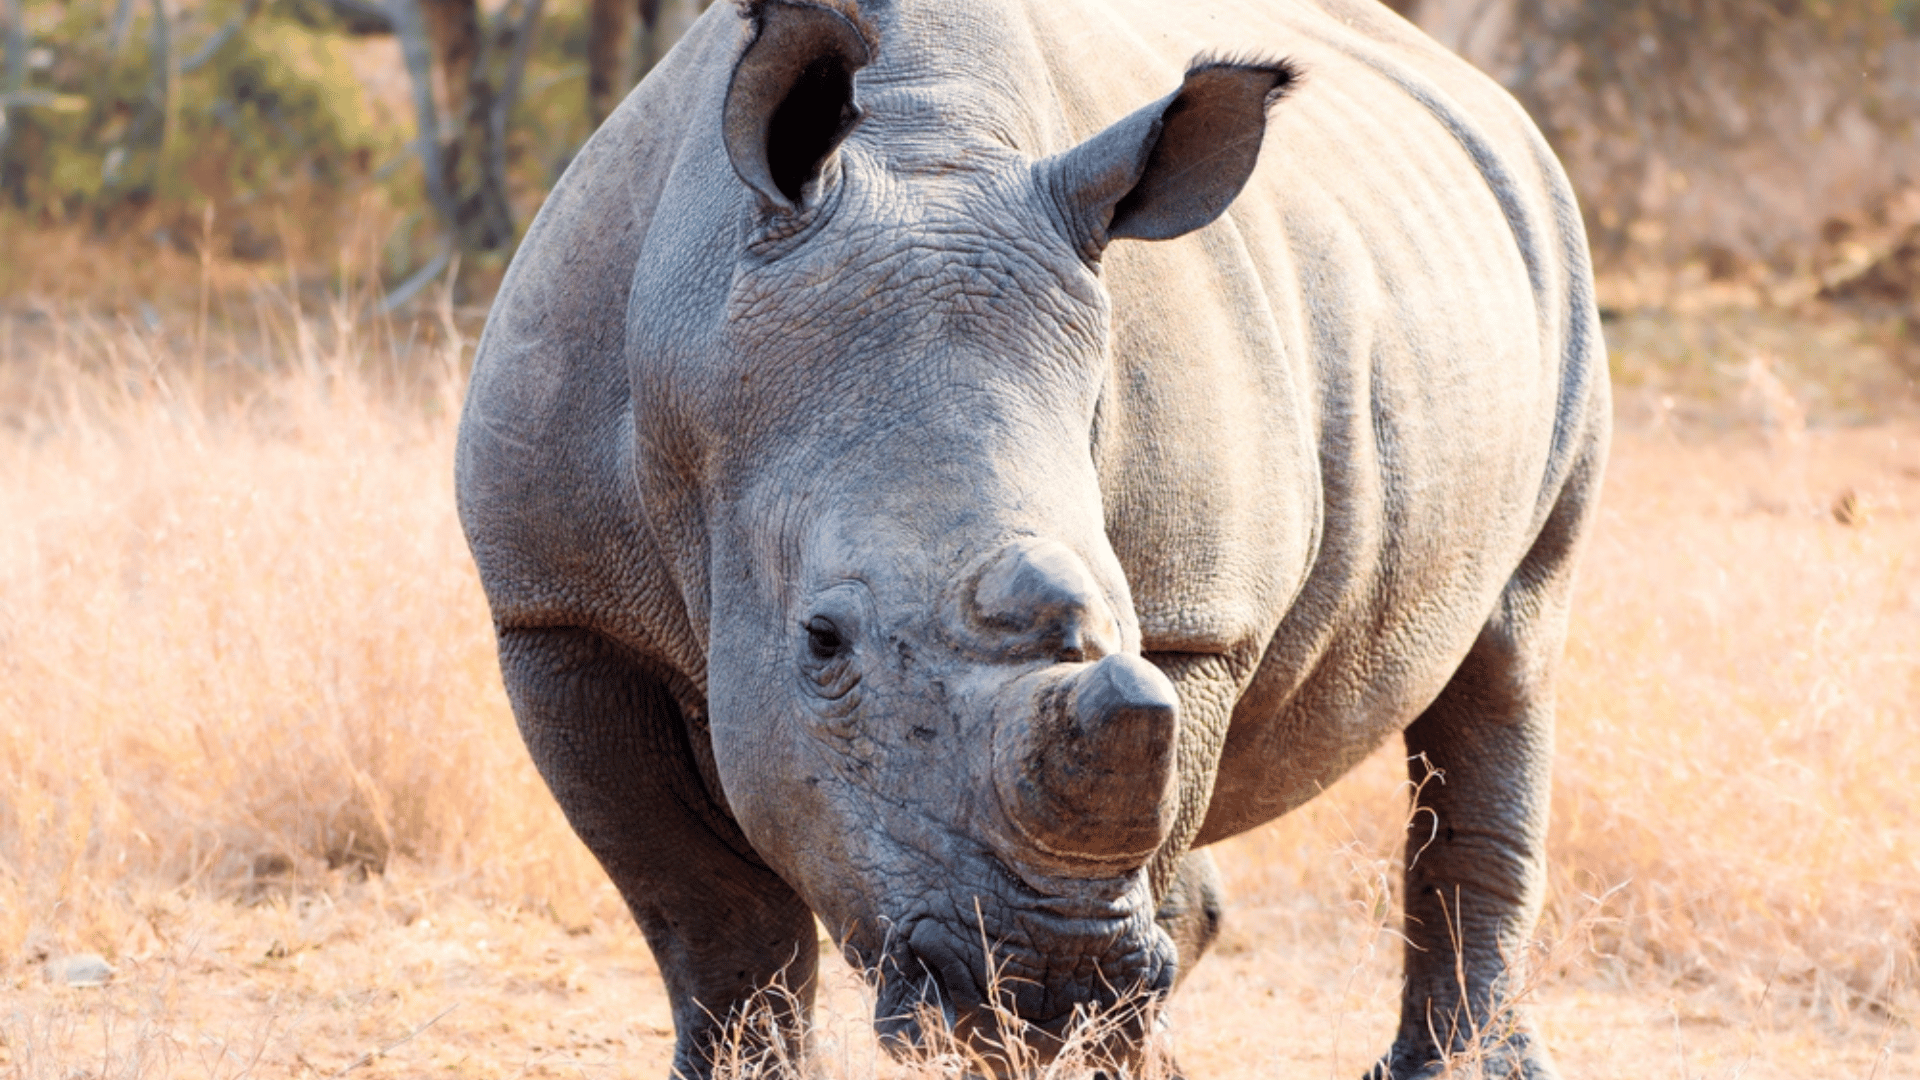 Researchers Believe Nuclear Technology Could Curb Rhino Poaching